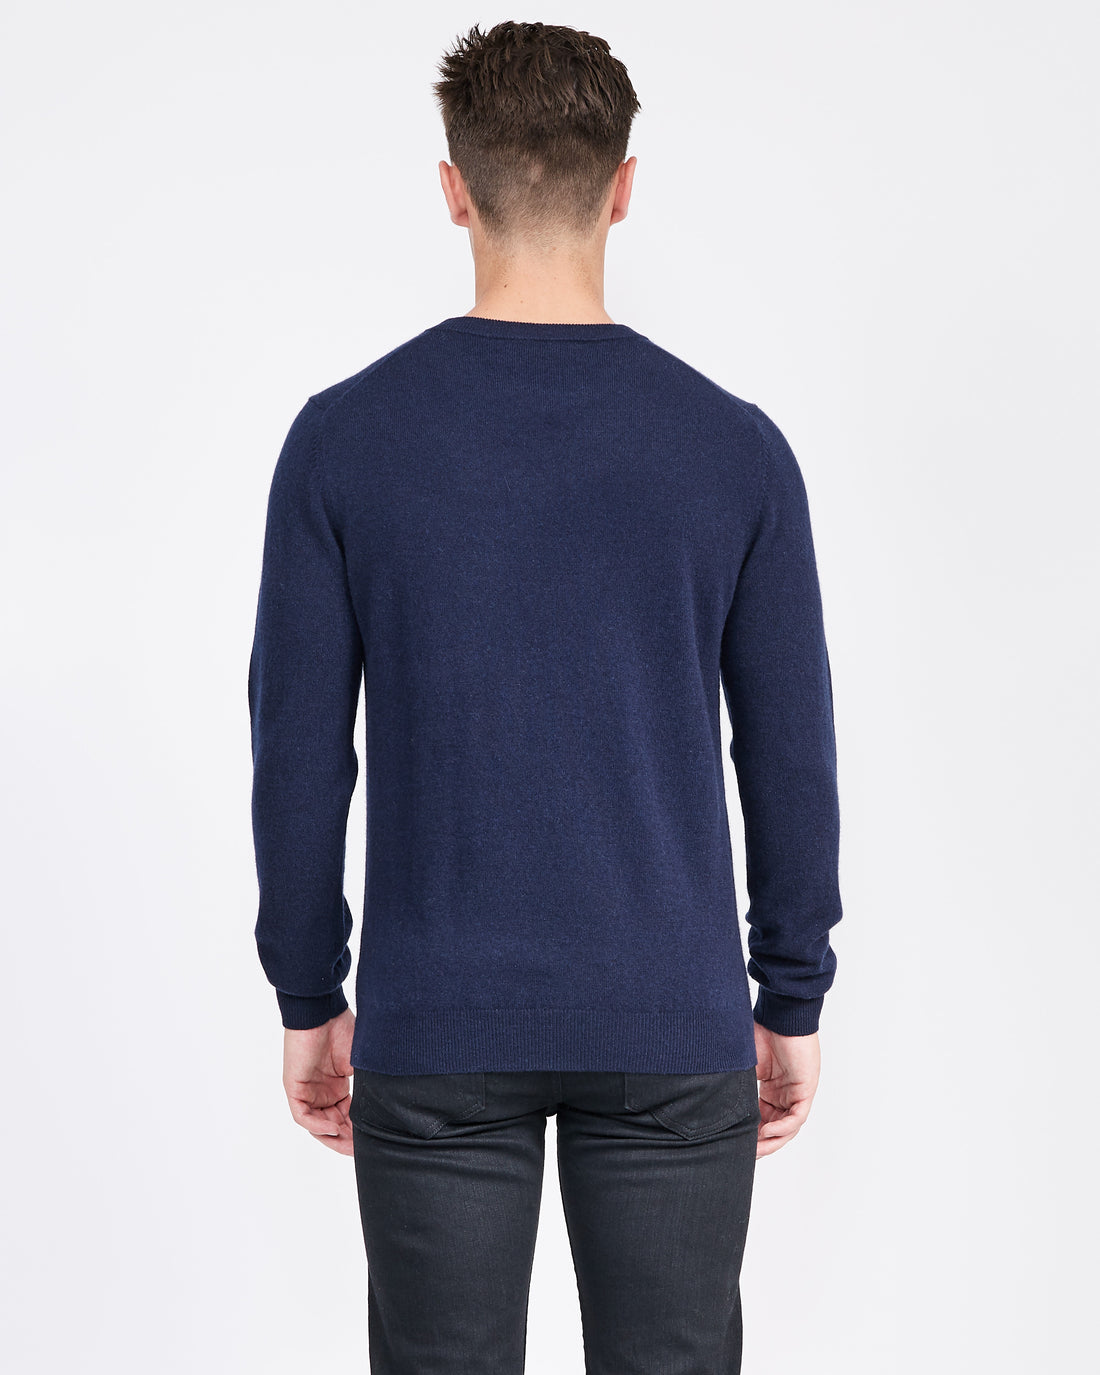 Personalized Cashmere Crew for Him